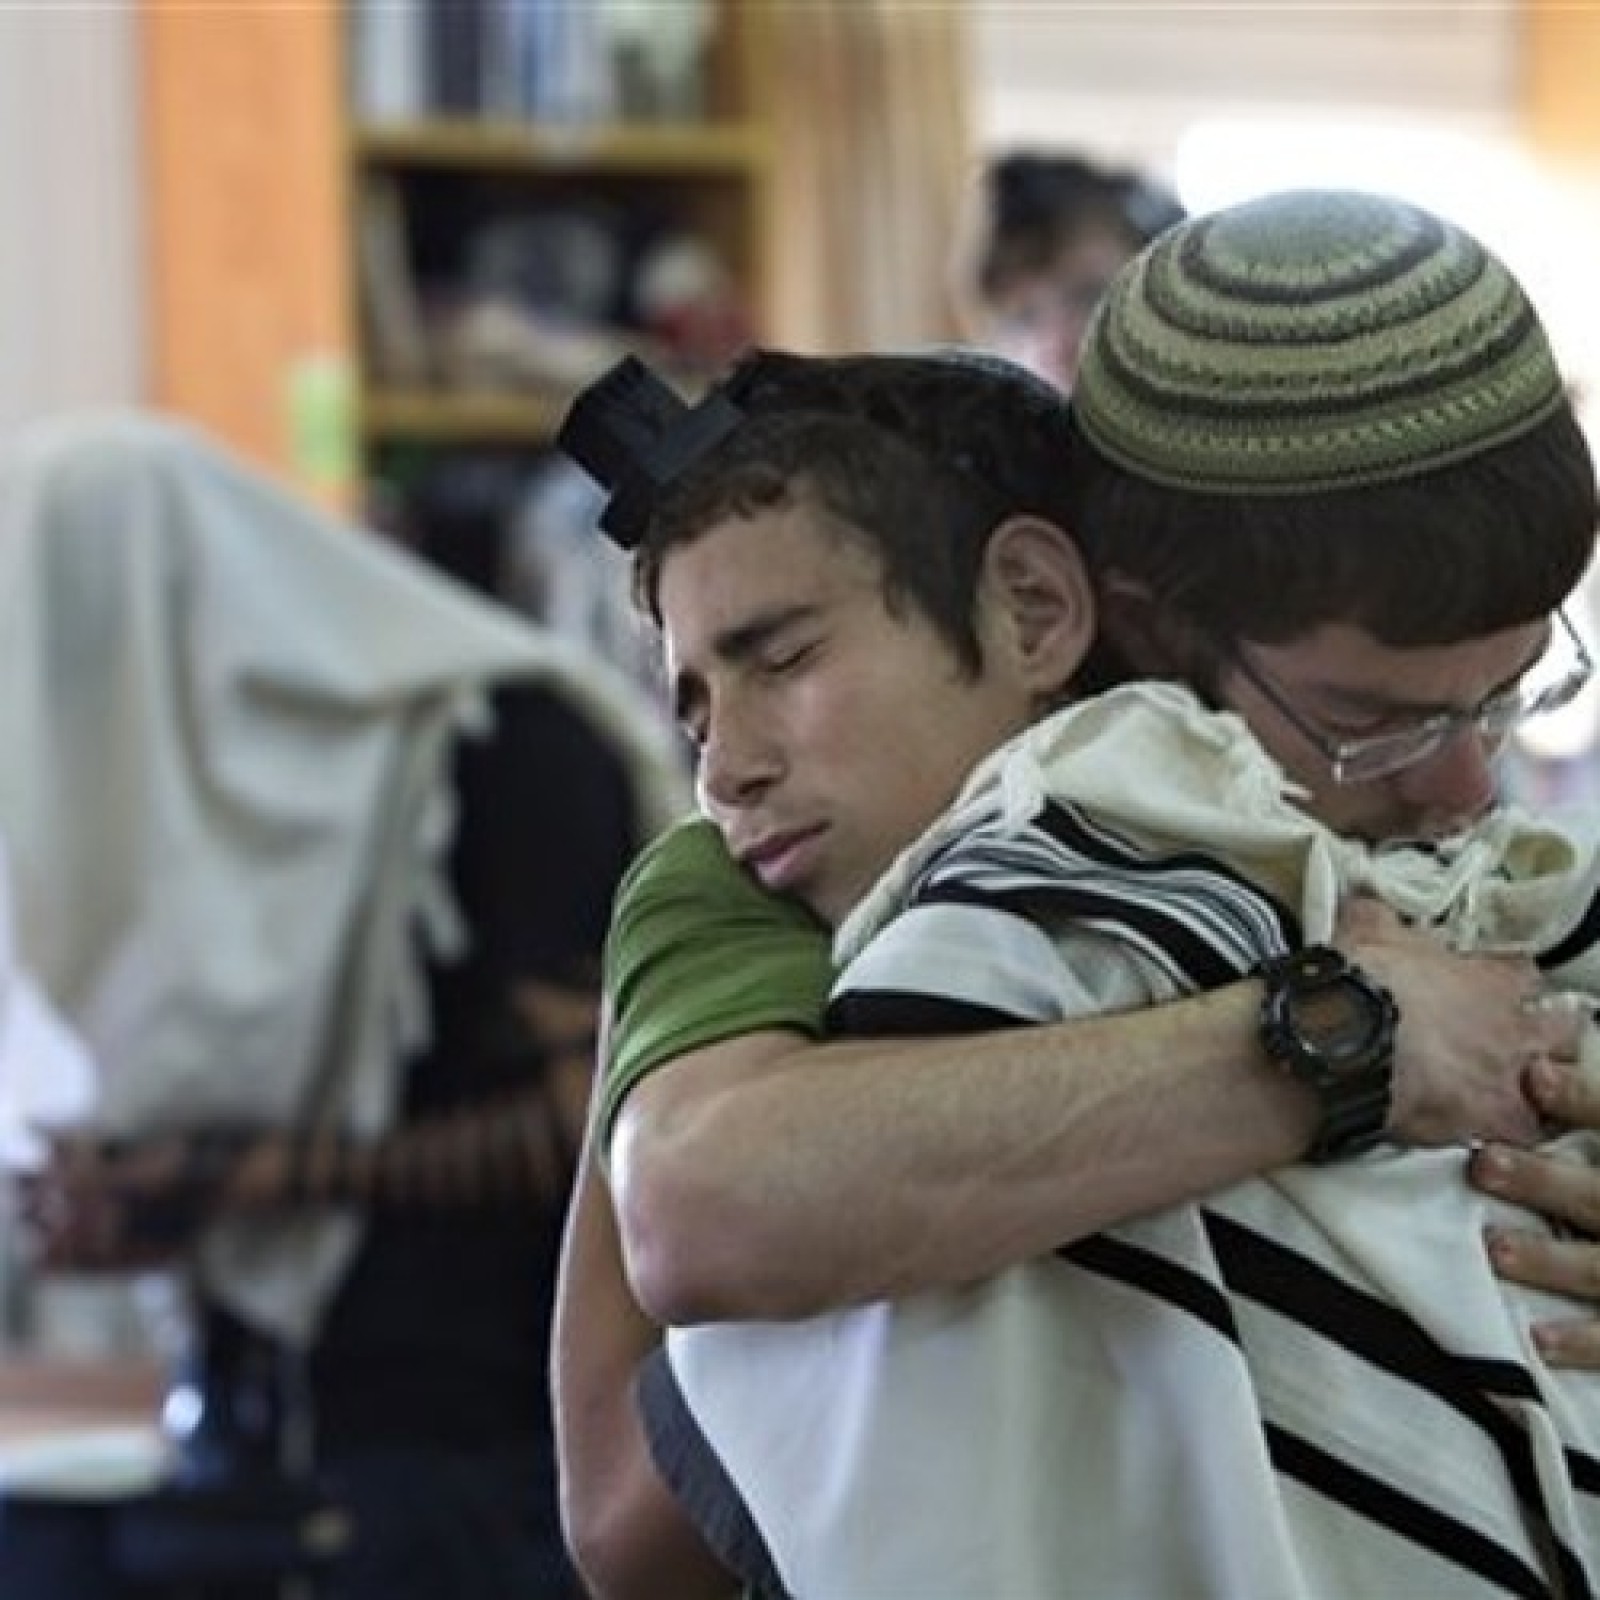 The story behind the kidnapping and death of three Israeli teens | WBEZ ...